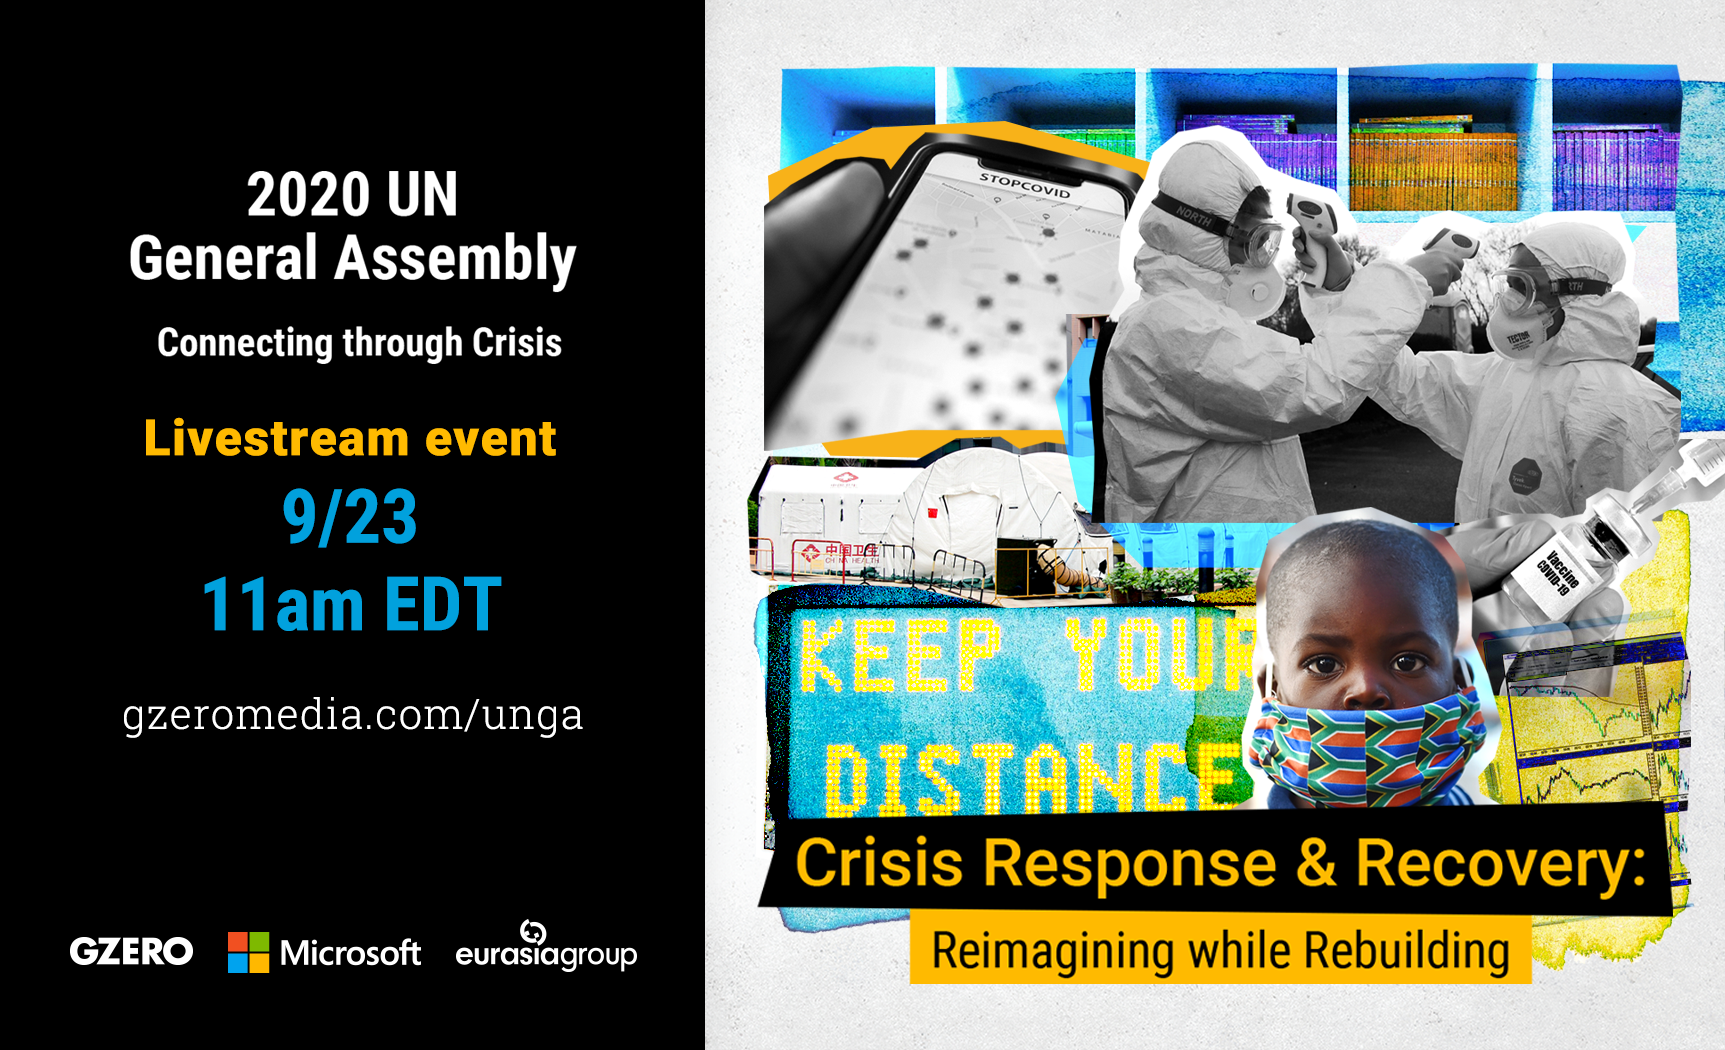 2020 UN General Assembly: Connecting Through Crisis - Livestream event 9-23 11 am EDT. Crisis Response & Recovery: Reimagining while Rebuilding